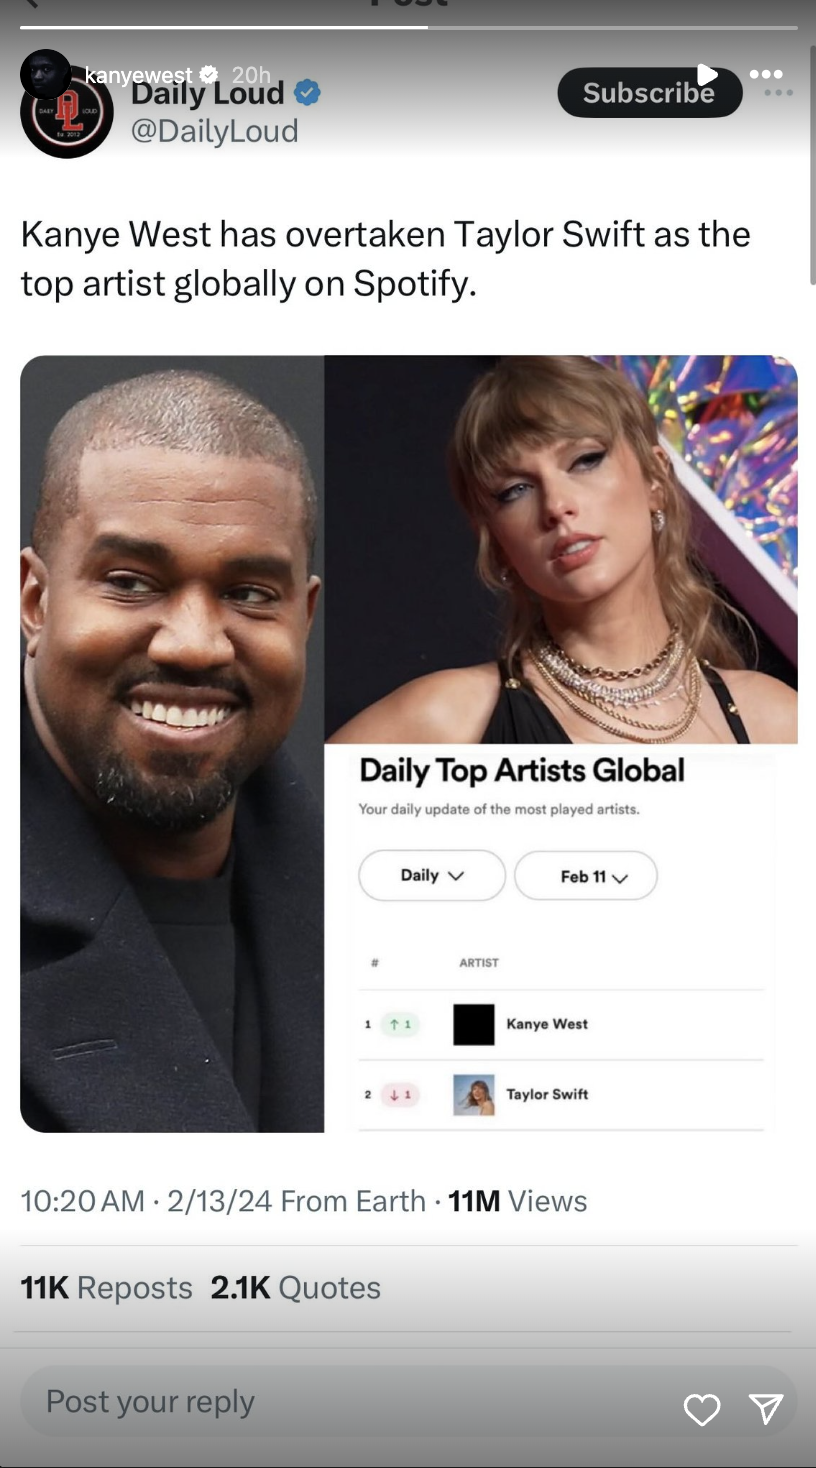 &quot;Kanye West and Taylor Swift top Daily Loud&#x27;s list of most-played artists on Spotify.&quot;